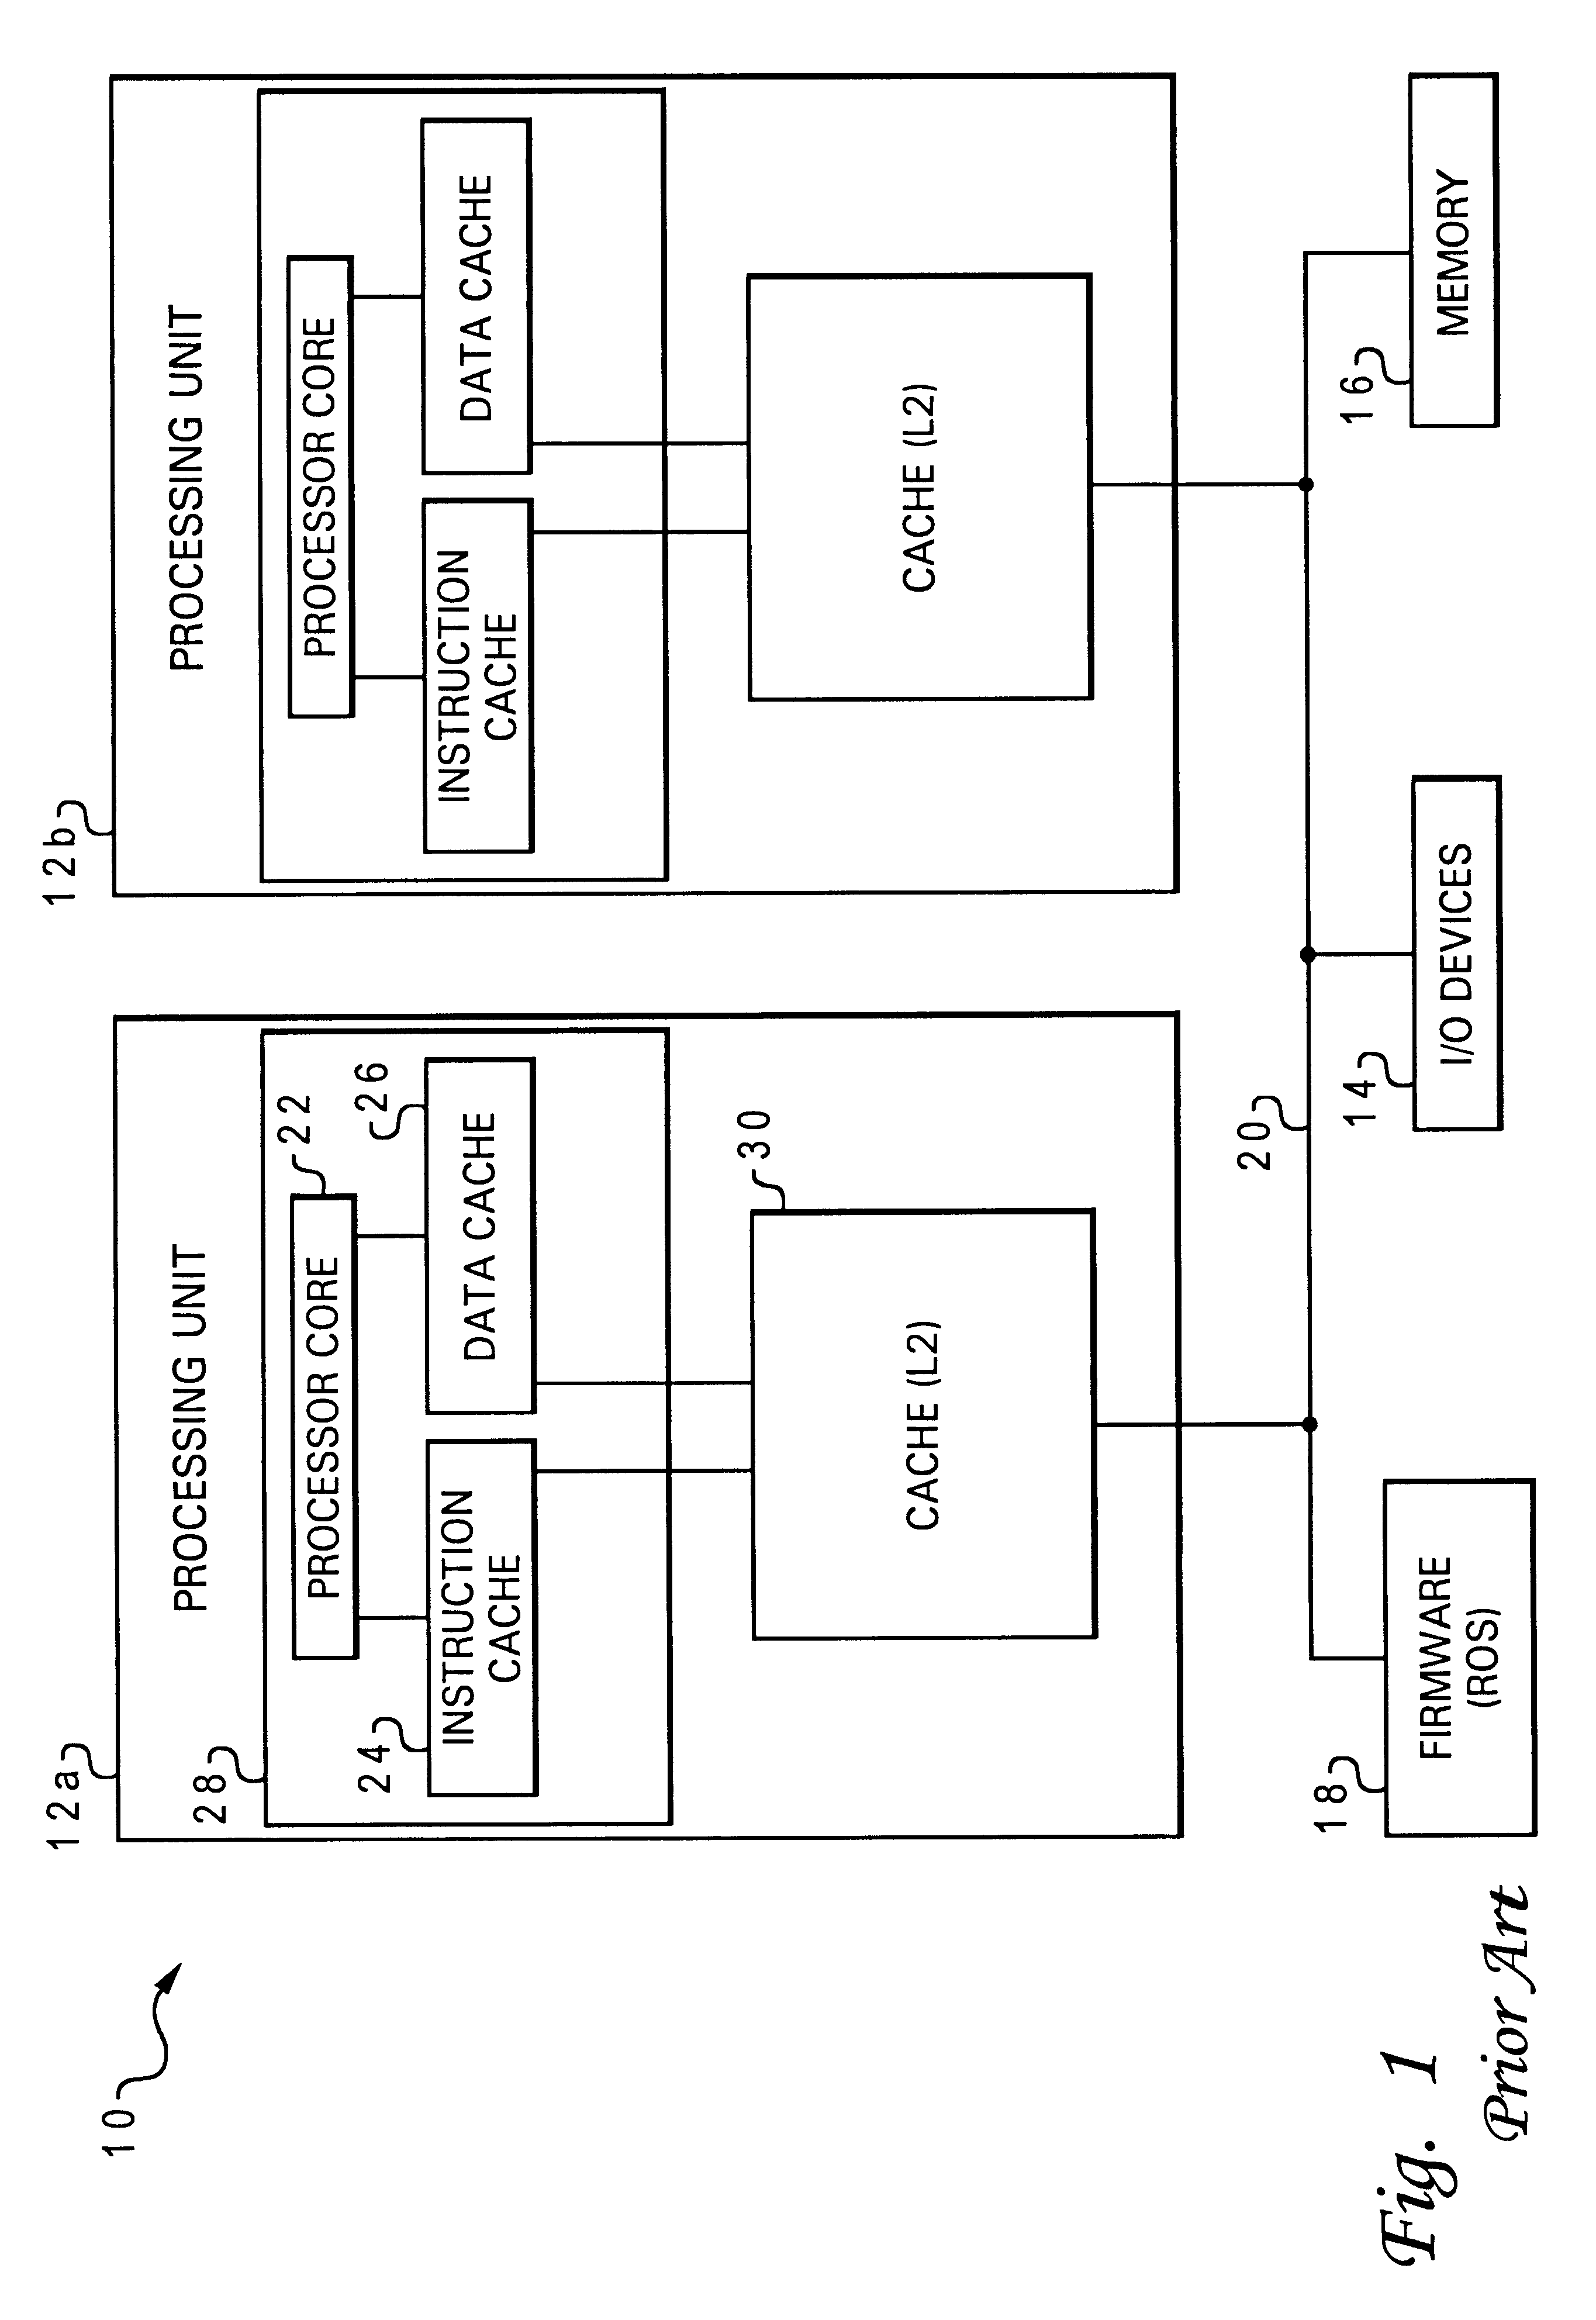 Cache allocation mechanism for modified-unsolicited cache state that modifies victimization priority bits